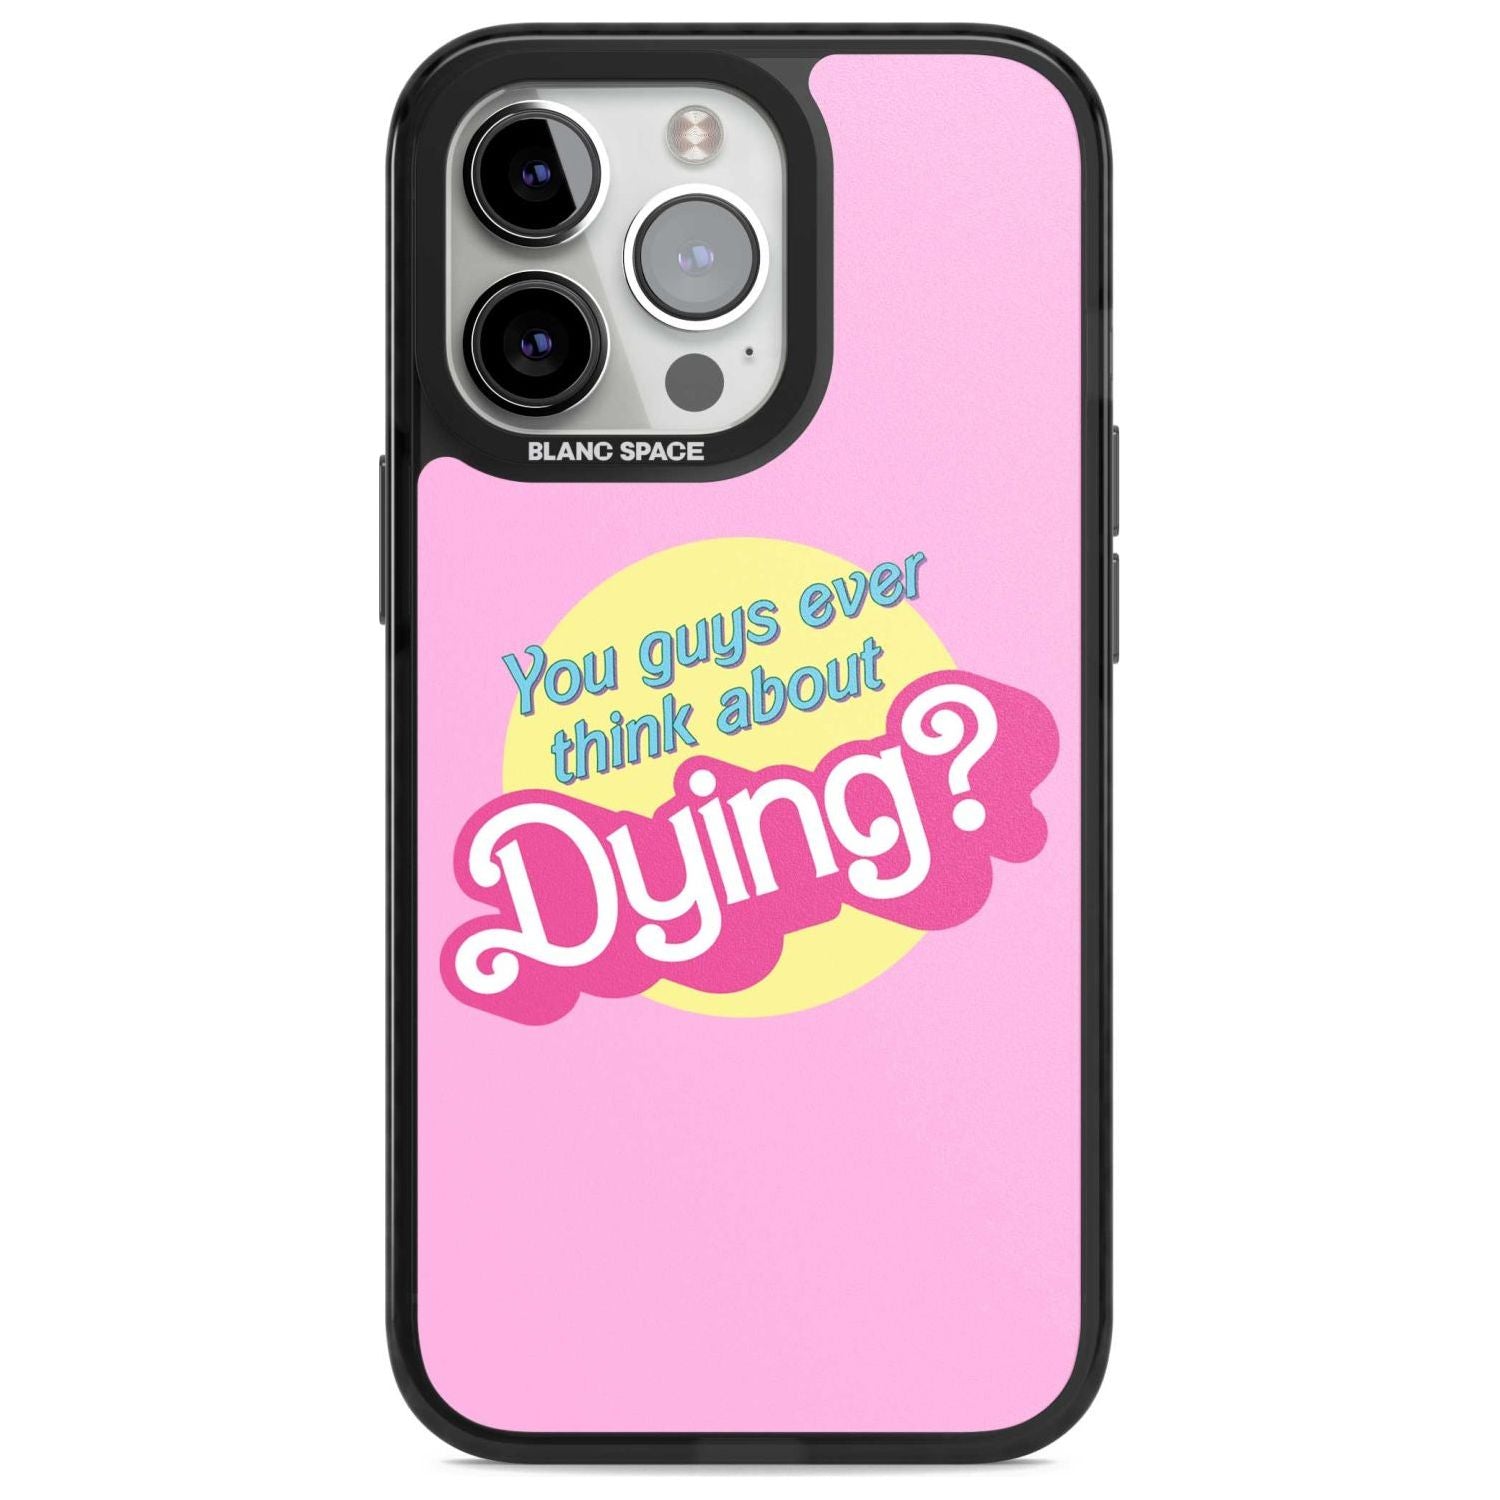 Ever Think About Dying? Phone Case iPhone 15 Pro Max / Magsafe Black Impact Case,iPhone 15 Pro / Magsafe Black Impact Case,iPhone 14 Pro Max / Magsafe Black Impact Case,iPhone 14 Pro / Magsafe Black Impact Case,iPhone 13 Pro / Magsafe Black Impact Case Blanc Space